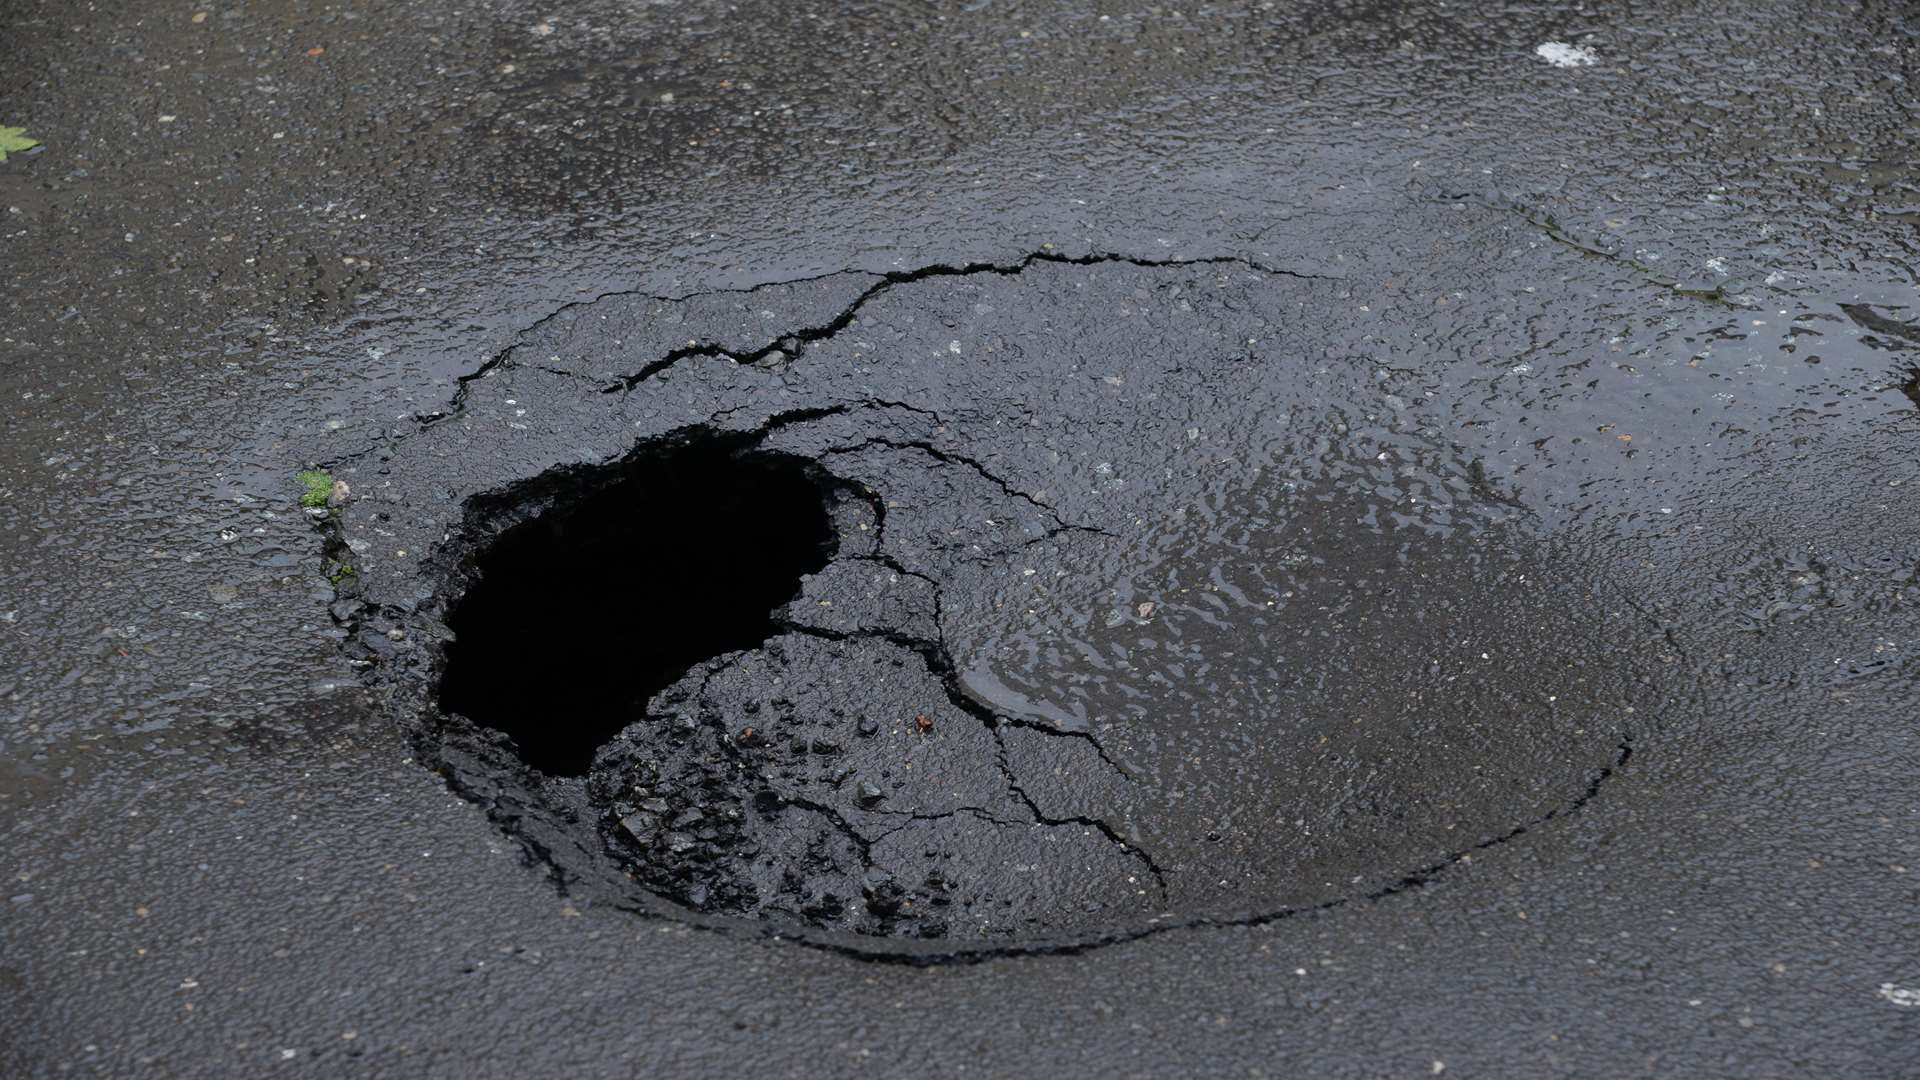 Hole opening up in the middle of Victoria Grove